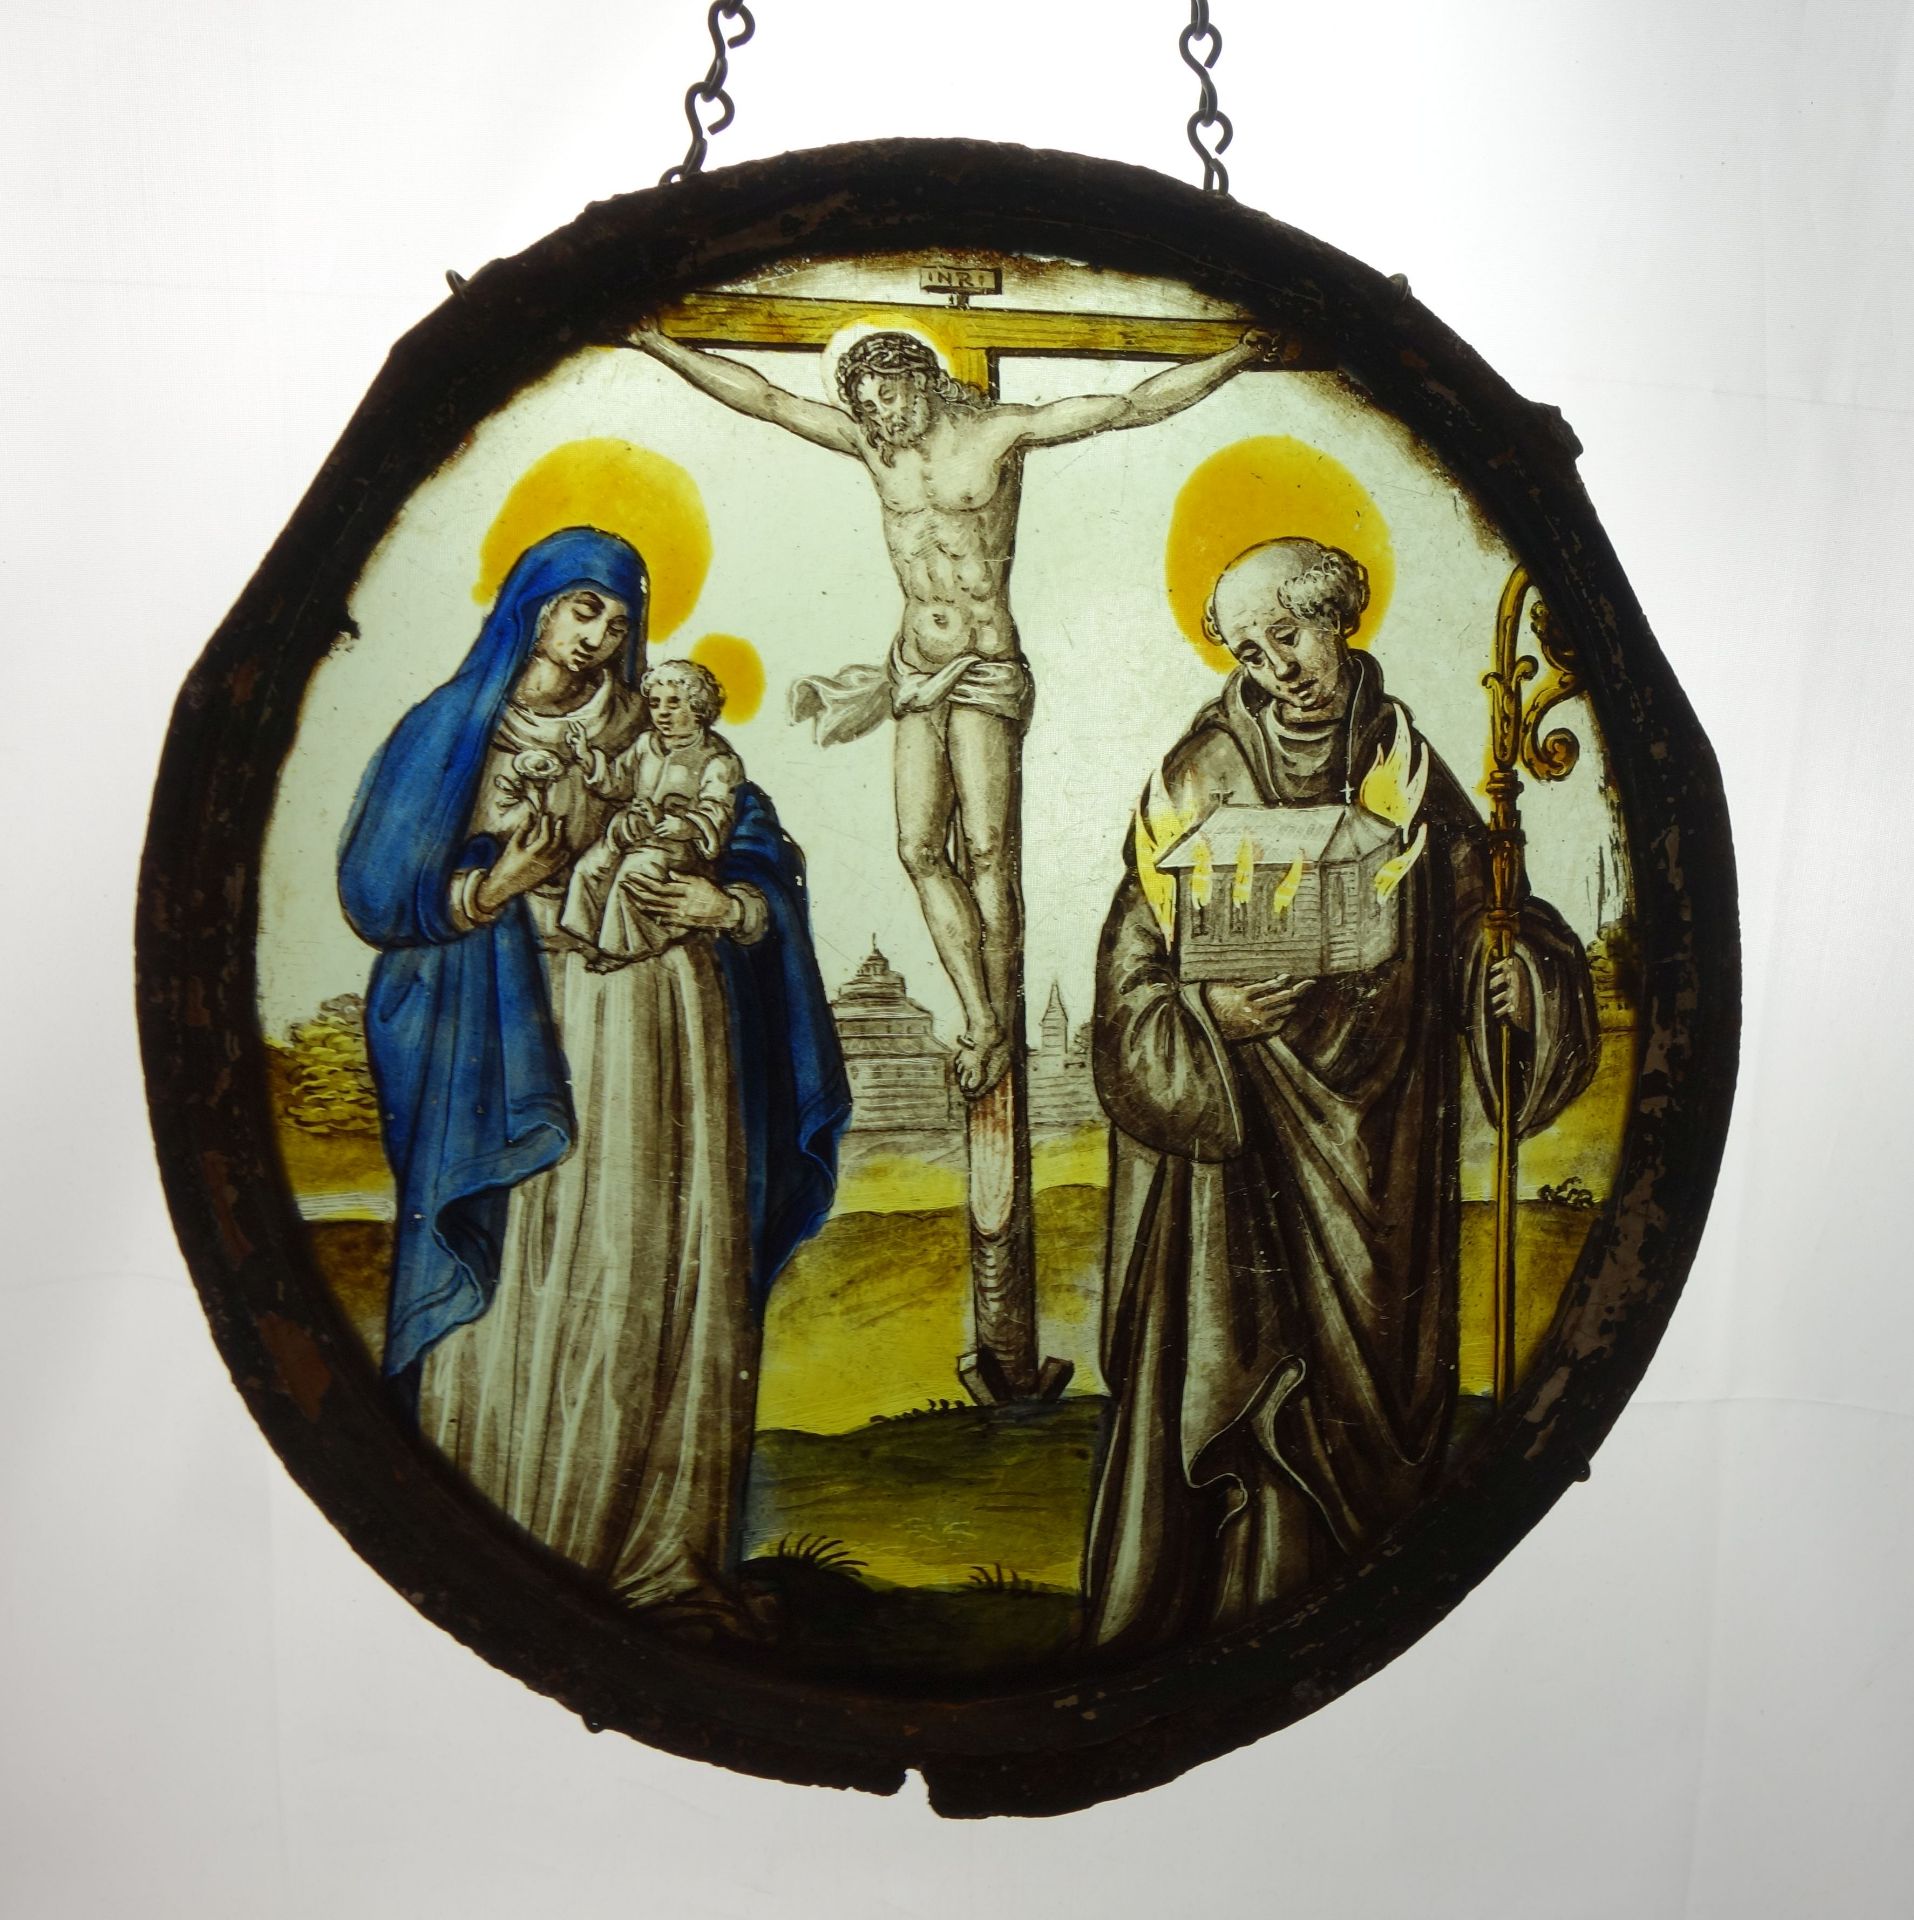 RELIGIOUS CABINET PANE / STAINED GLASS ON ROUND PANE